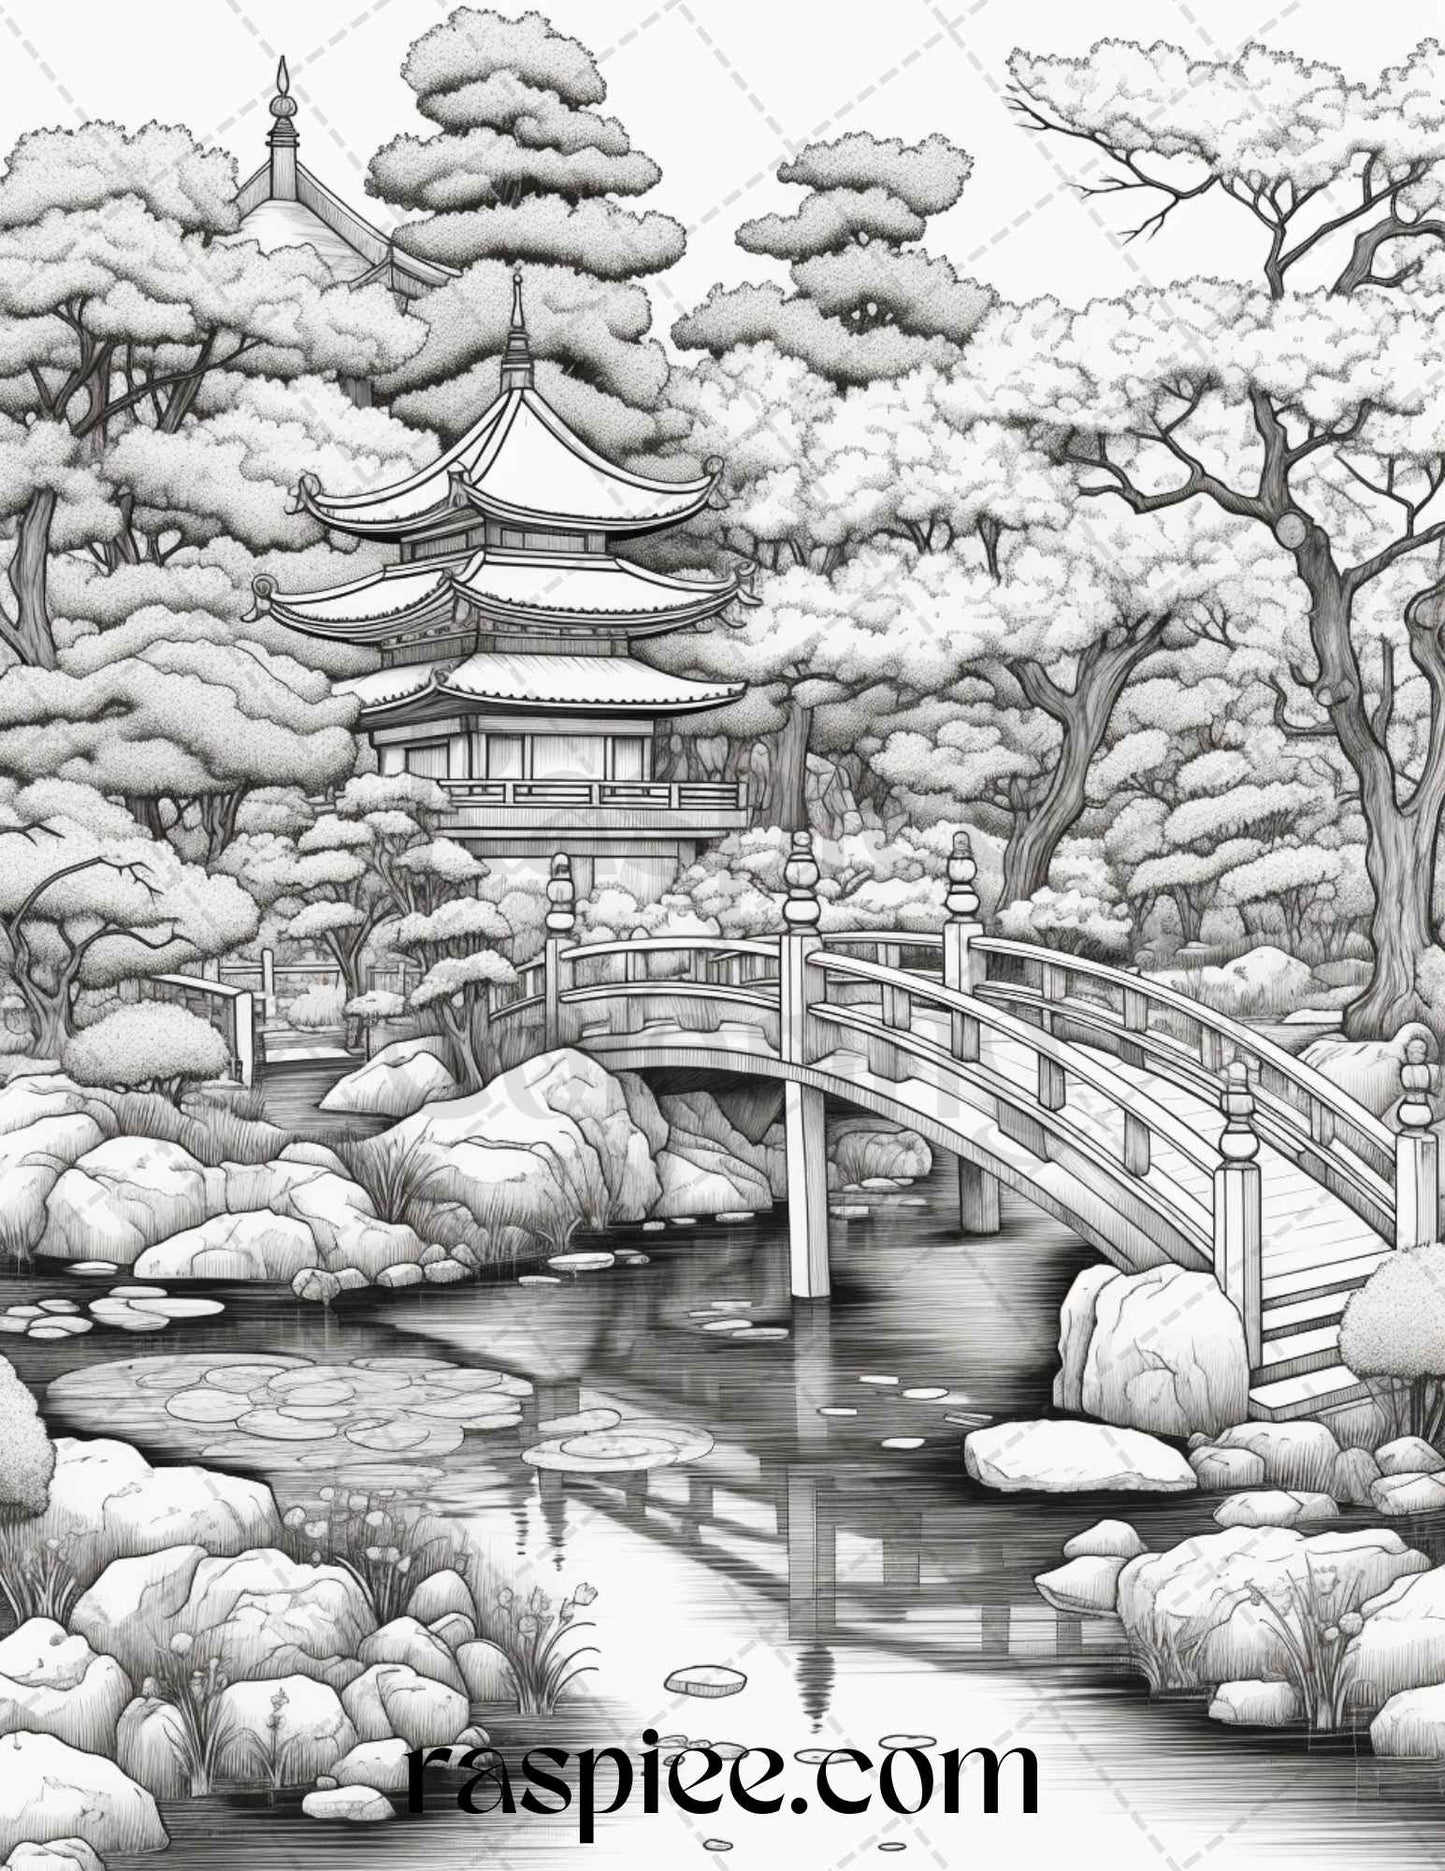 Japanese Garden Grayscale Coloring Pages Printable for Adults, PDF File Instant Download - raspiee